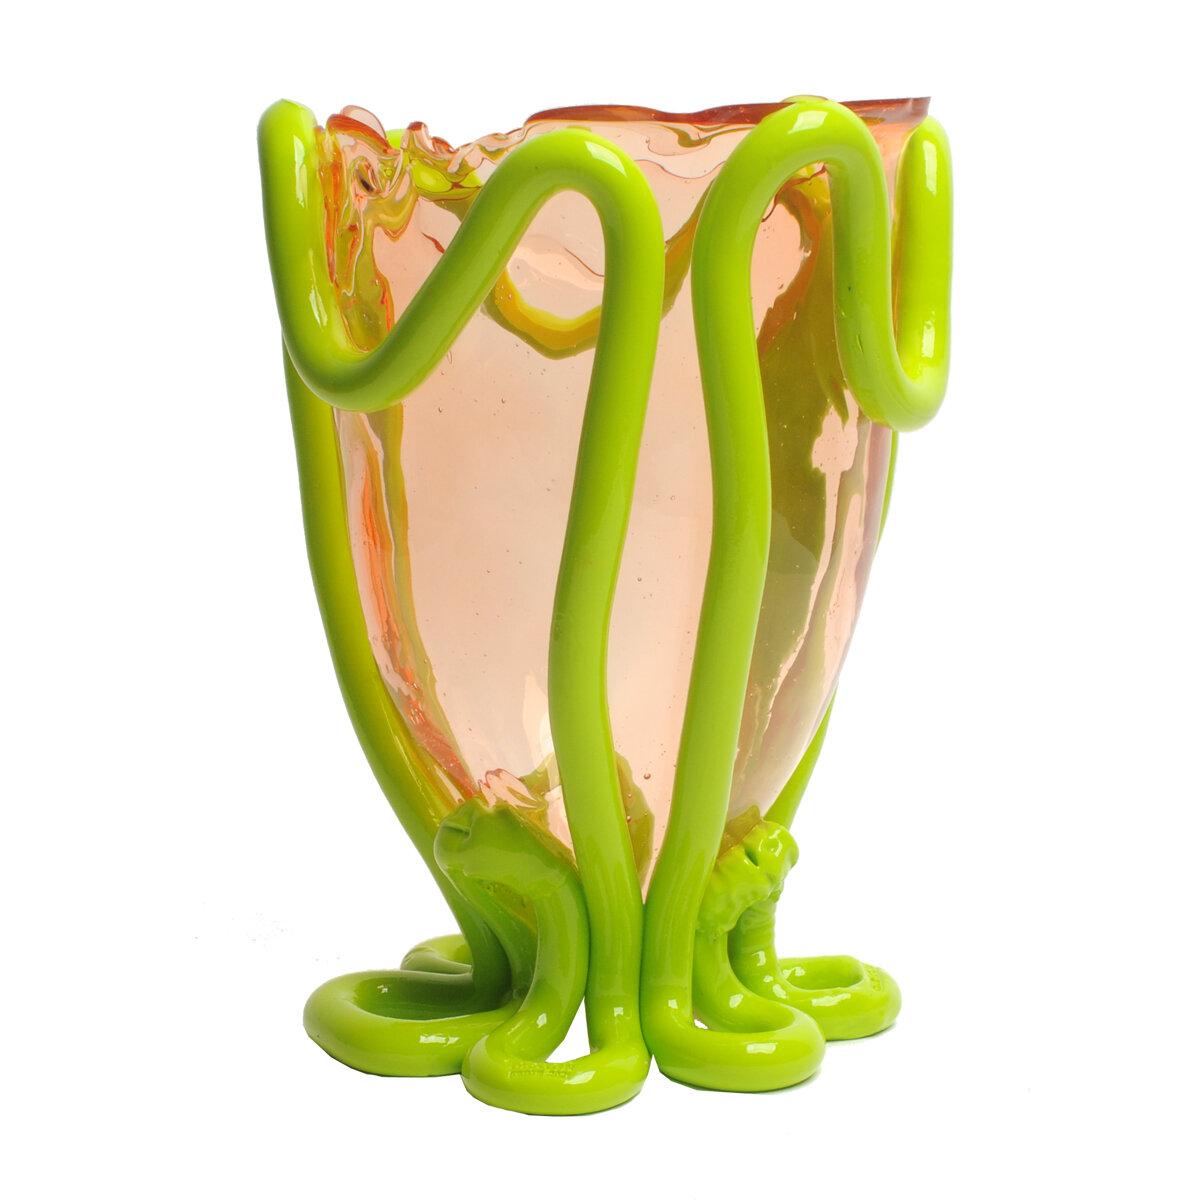 Indian Summer vase, clear pink, matt lime

Vase in soft resin designed by Gaetano Pesce in 1995 for Fish Design collection.
Measures: L ø 22cm x H 36cm
Colours: clear pink, matt lime

Other sizes available.

Vase in soft resin designed by Gaetano